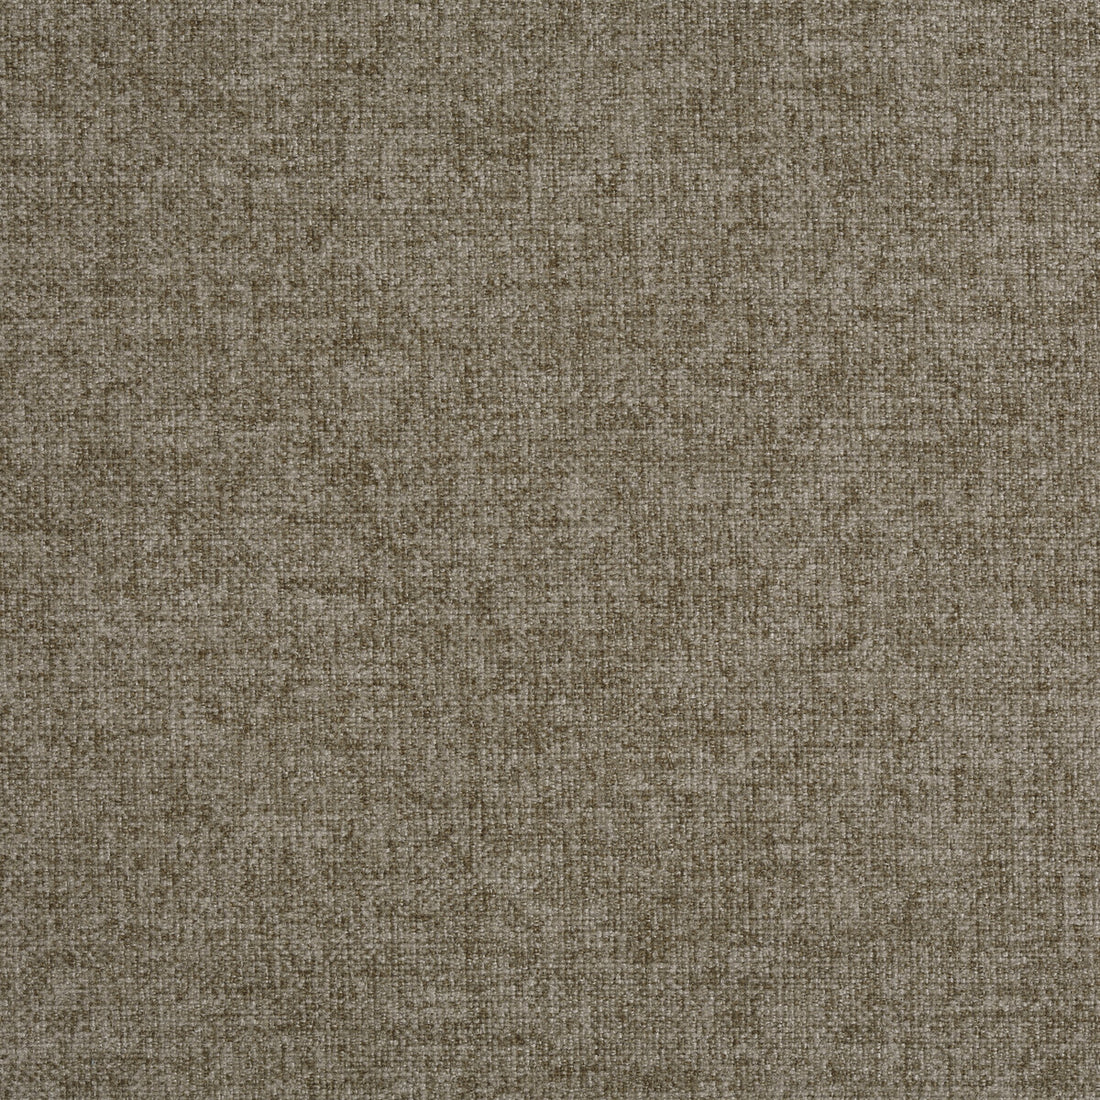 Kravet Contract fabric in 35122-106 color - pattern 35122.106.0 - by Kravet Contract in the Crypton Incase collection